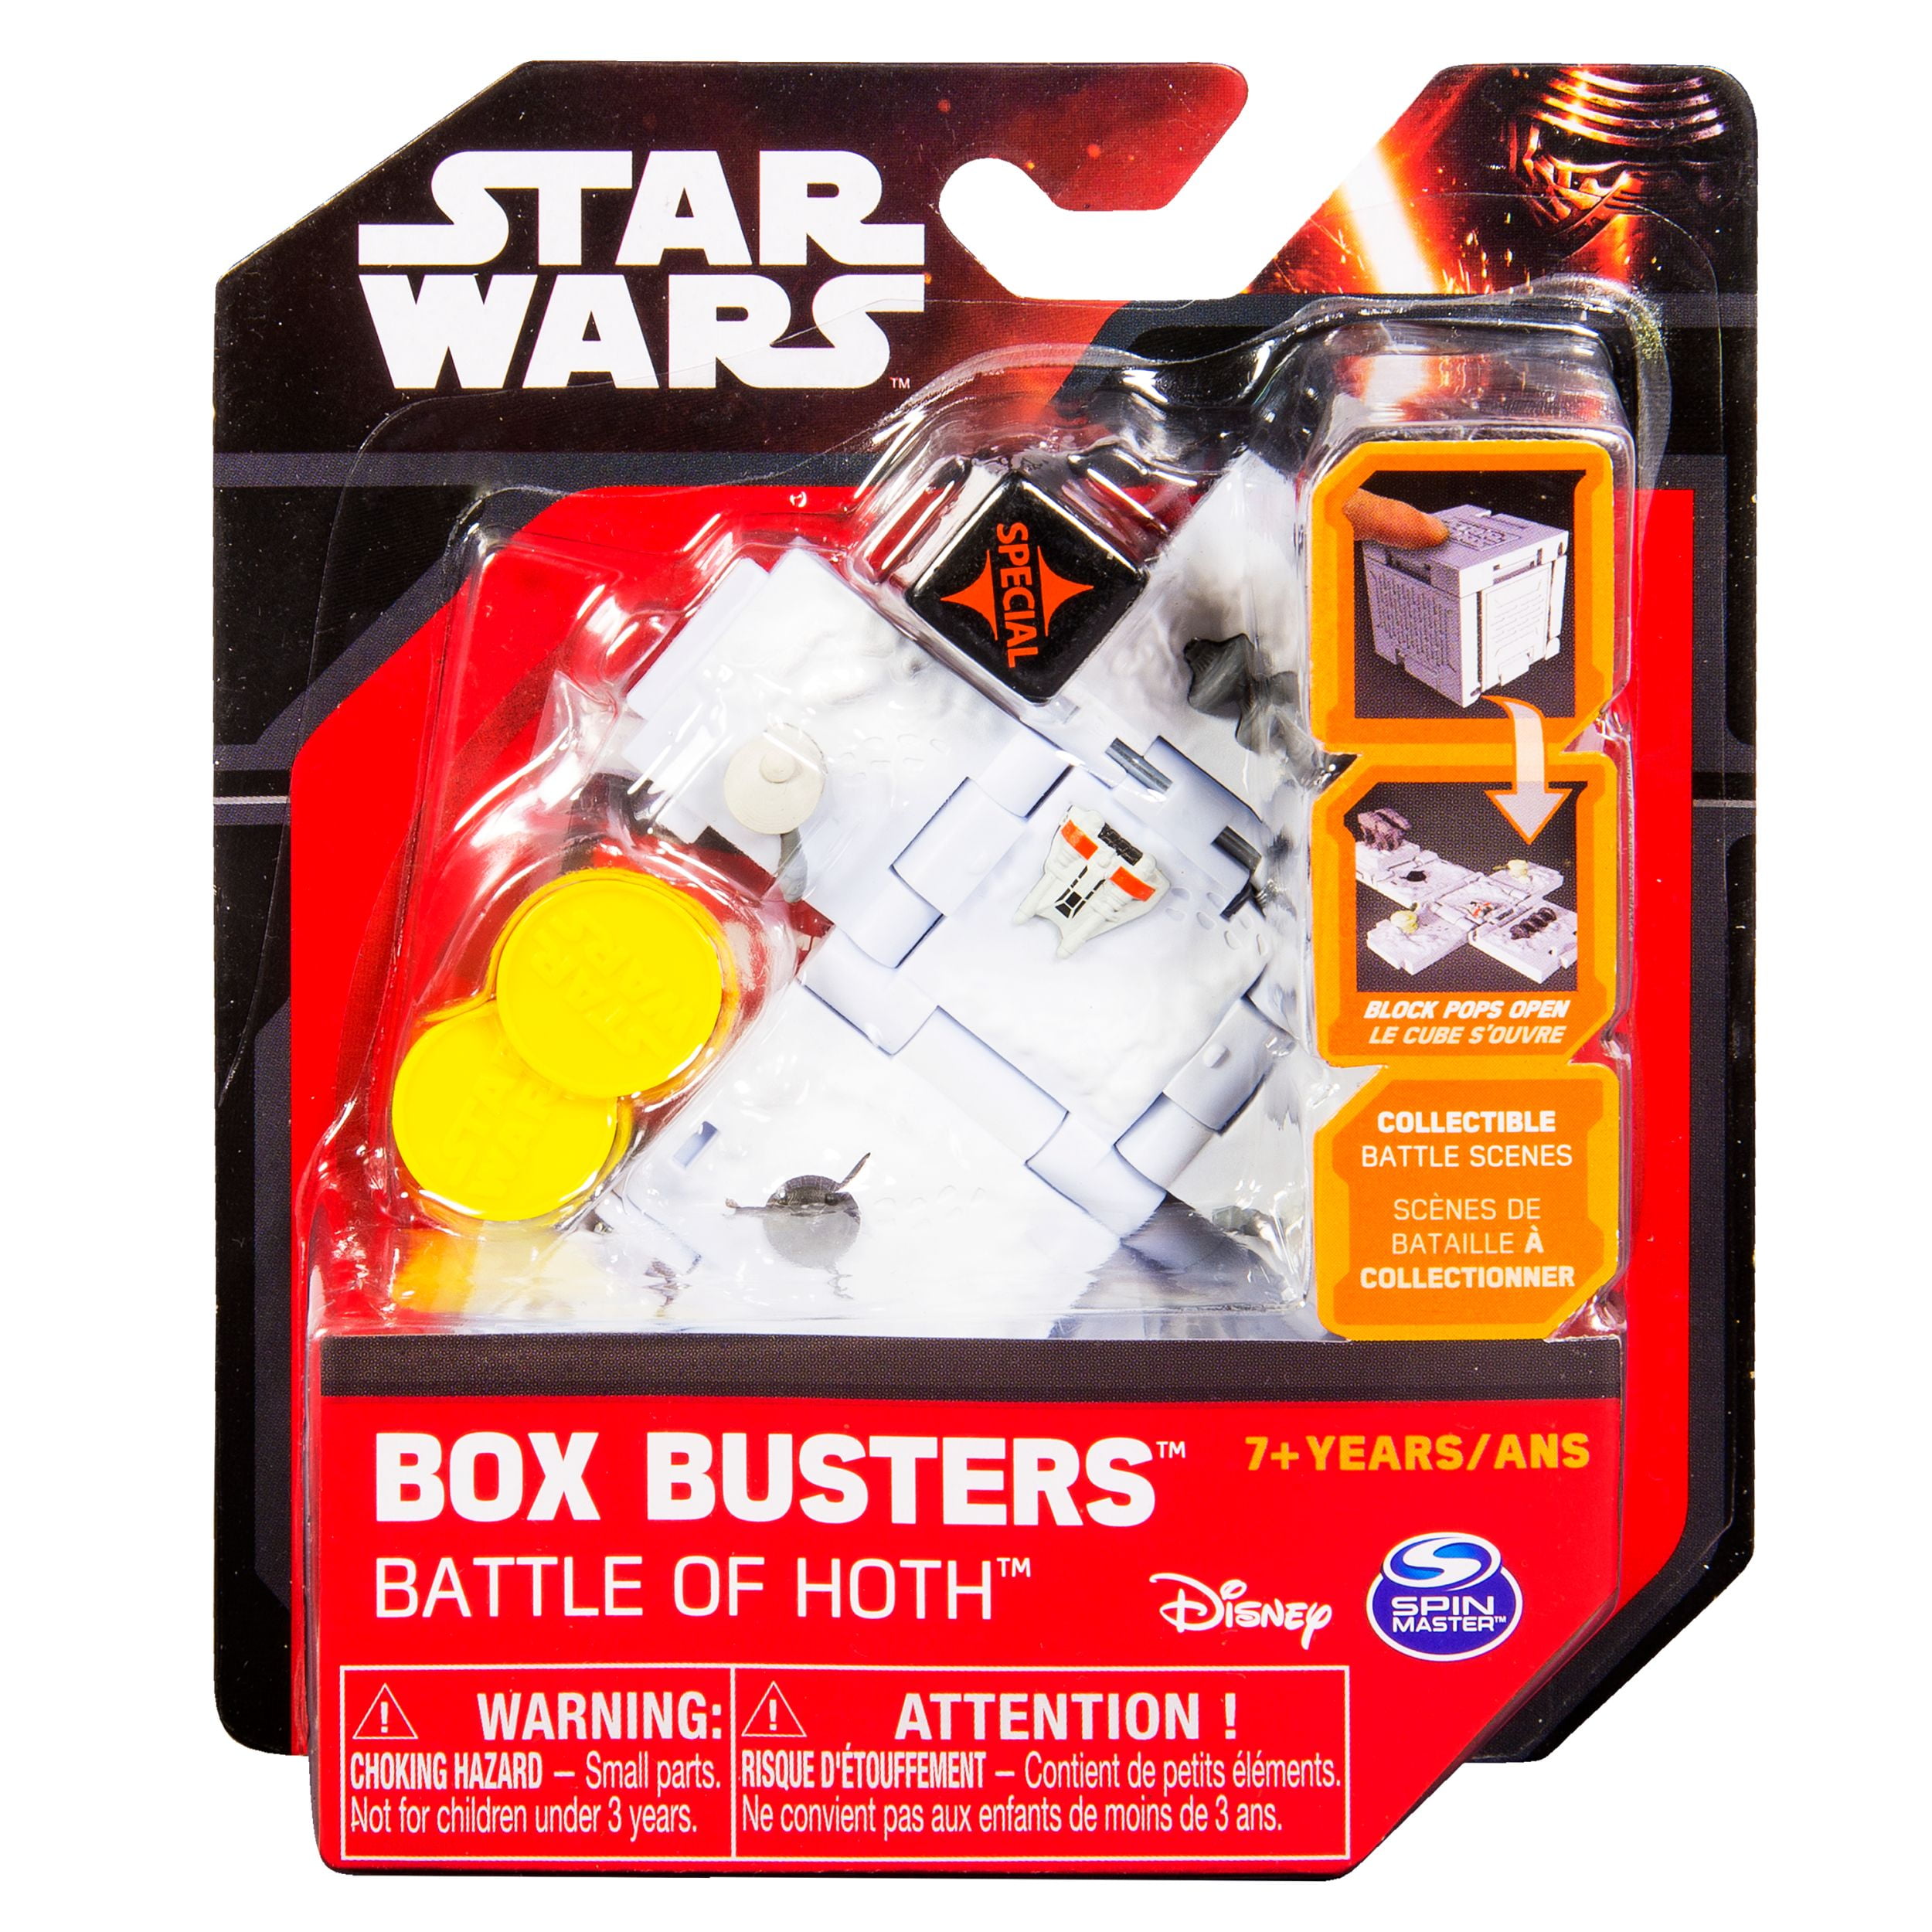 Star Wars Box Busters Battle of Hoth Game/Playset Spin Masters Disney 